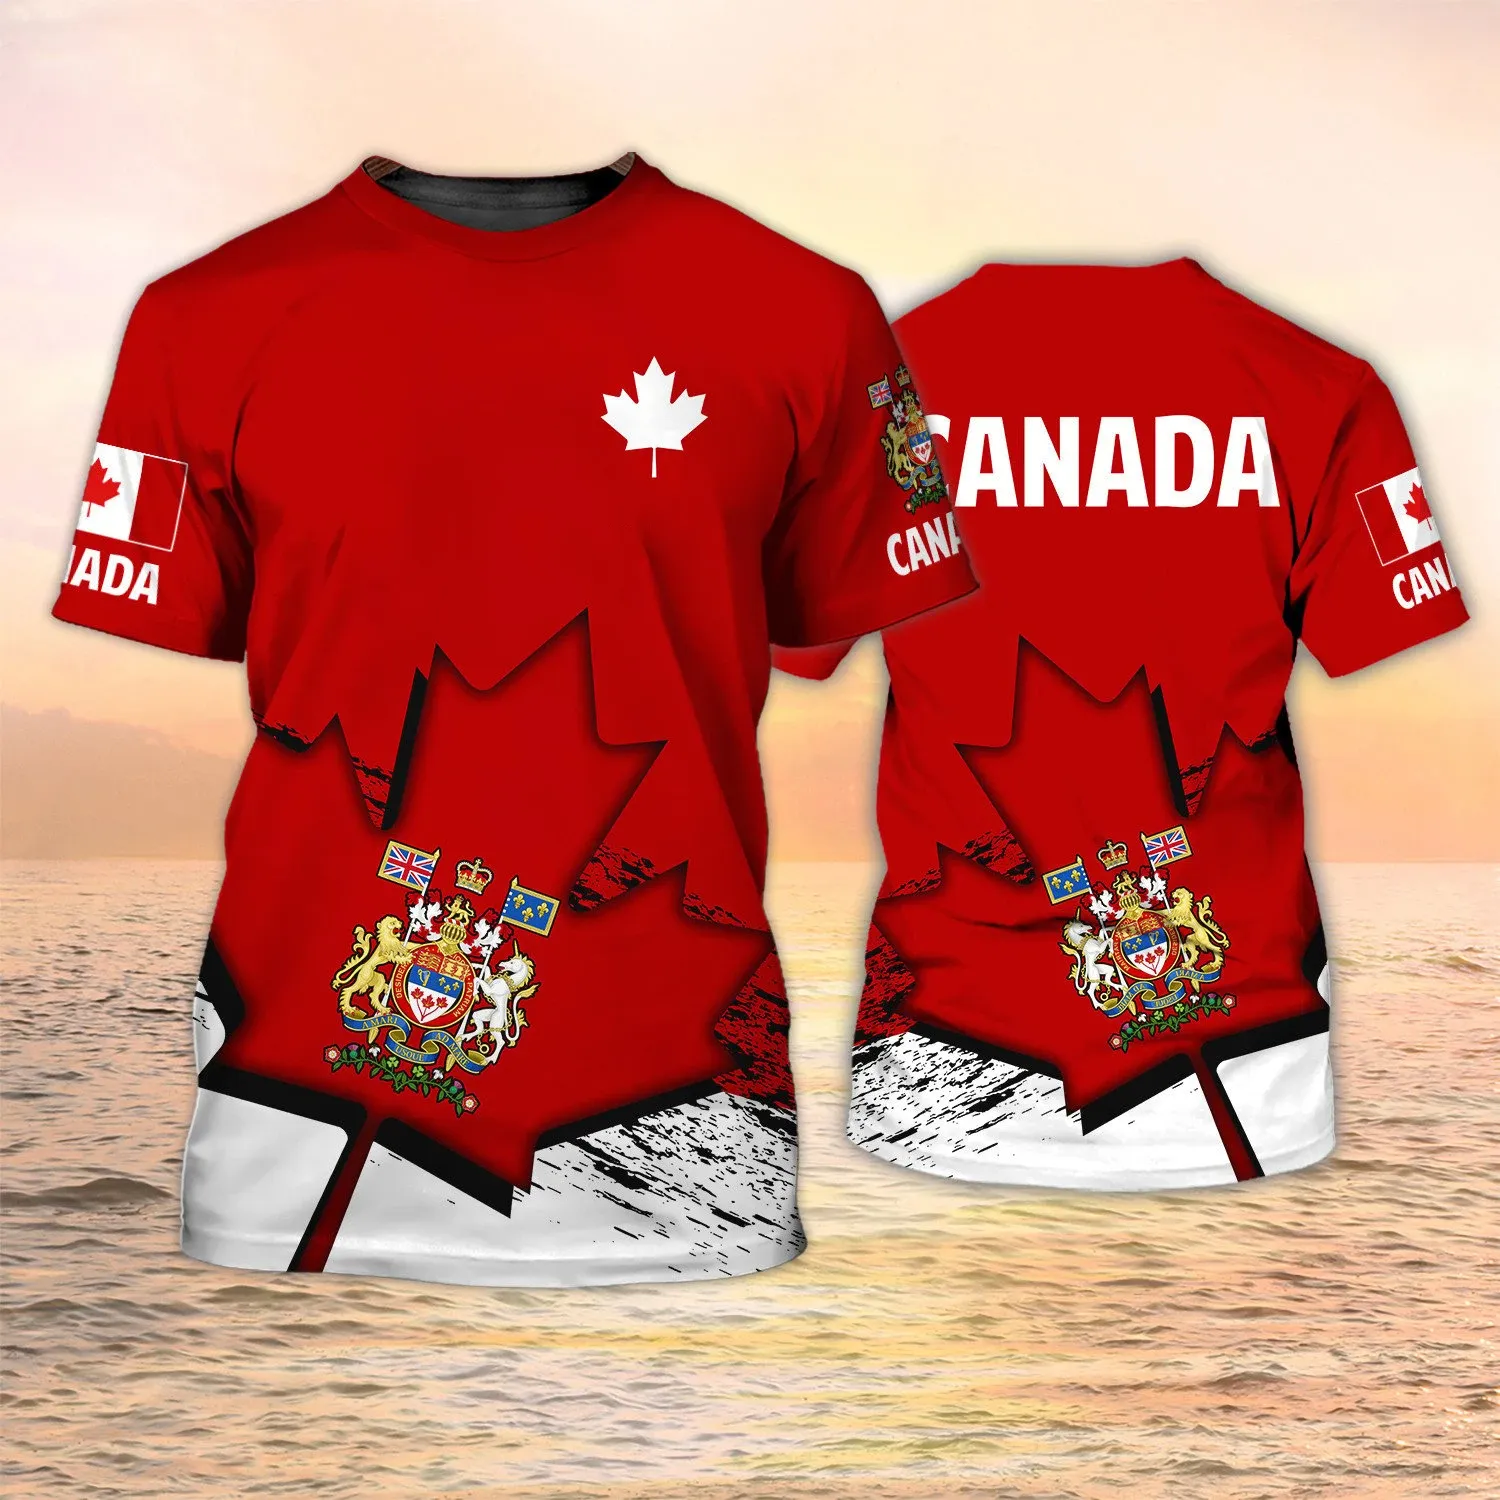 Canada T-Shirts Canadian Flag Emblem Maple Leaf Print Plus Size T Shirt Kids Tees With factory Outlet Male Tops Clothing Outfit